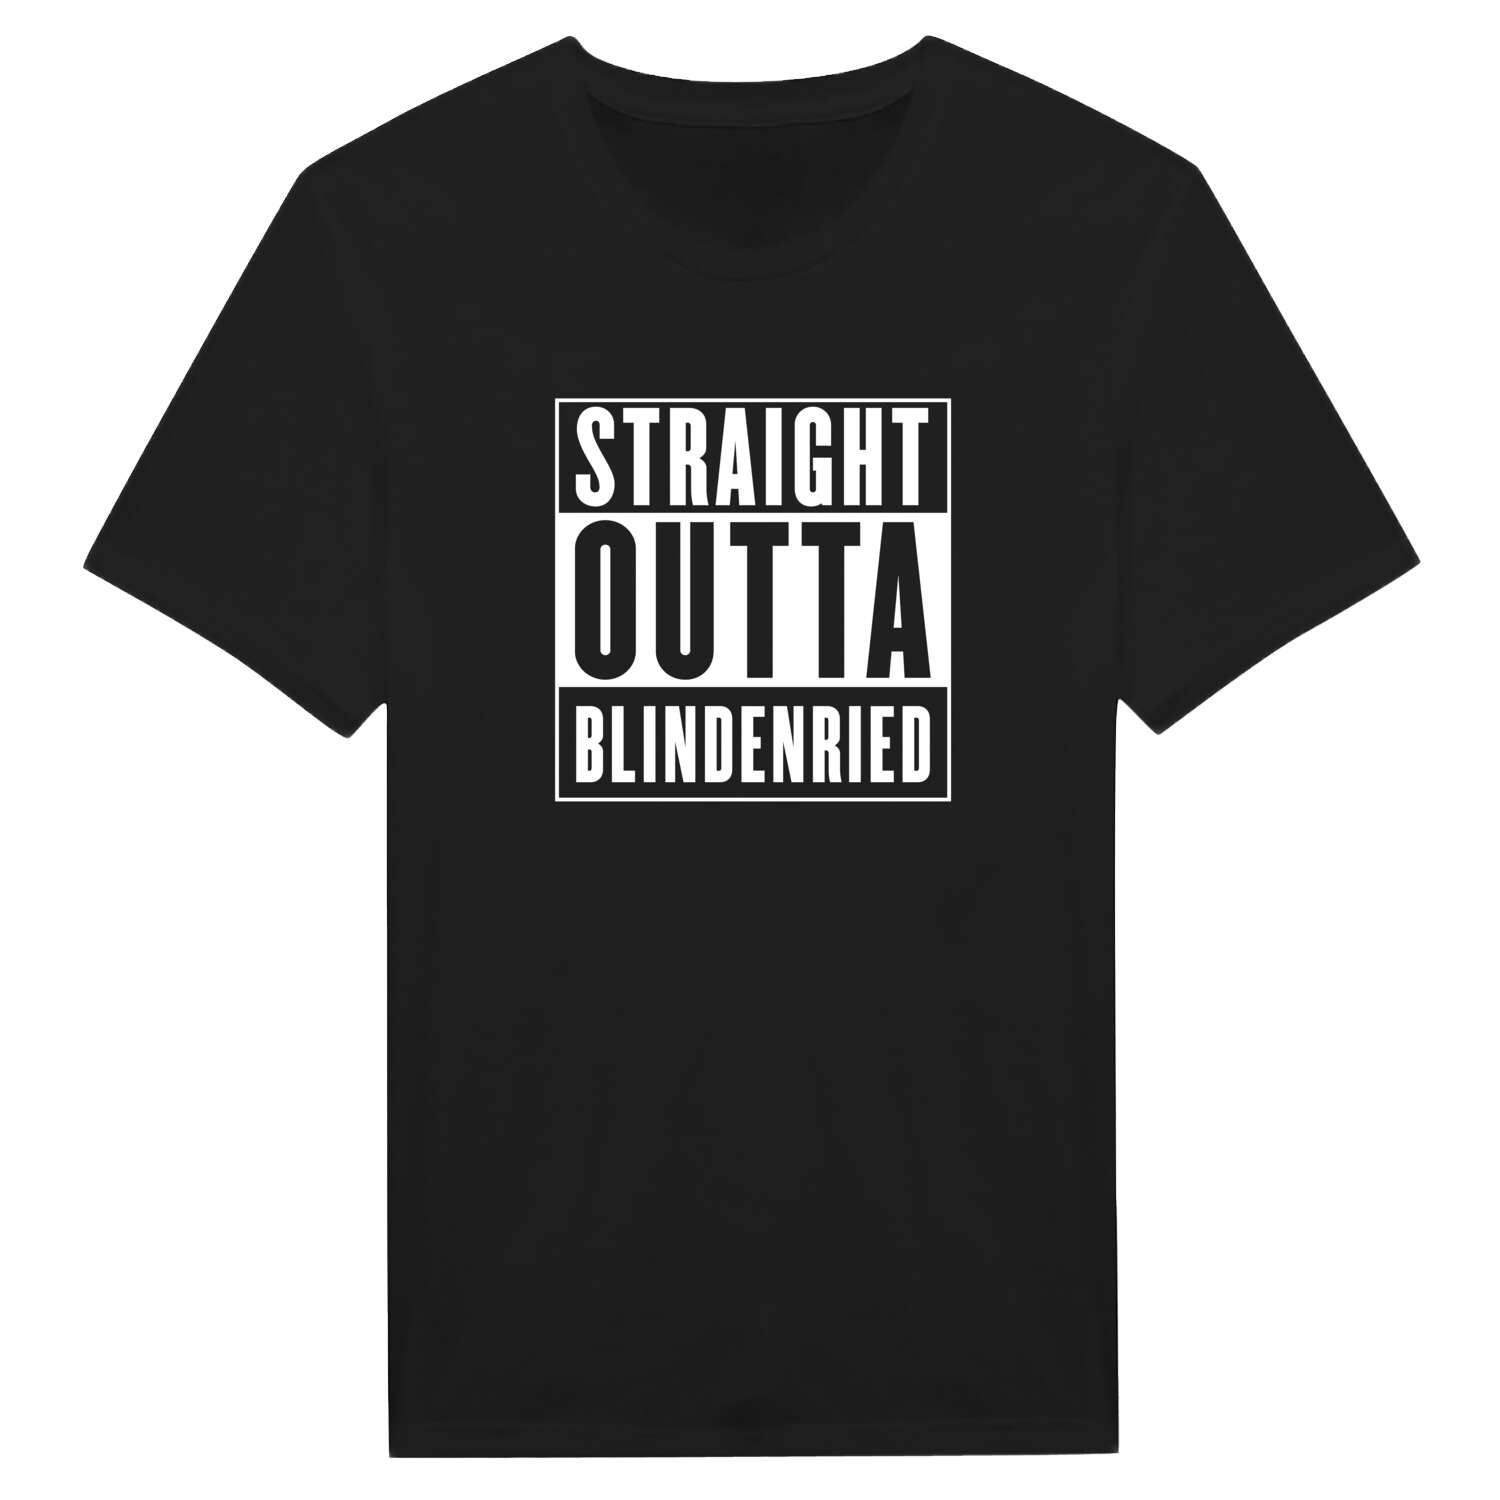 Blindenried T-Shirt »Straight Outta«